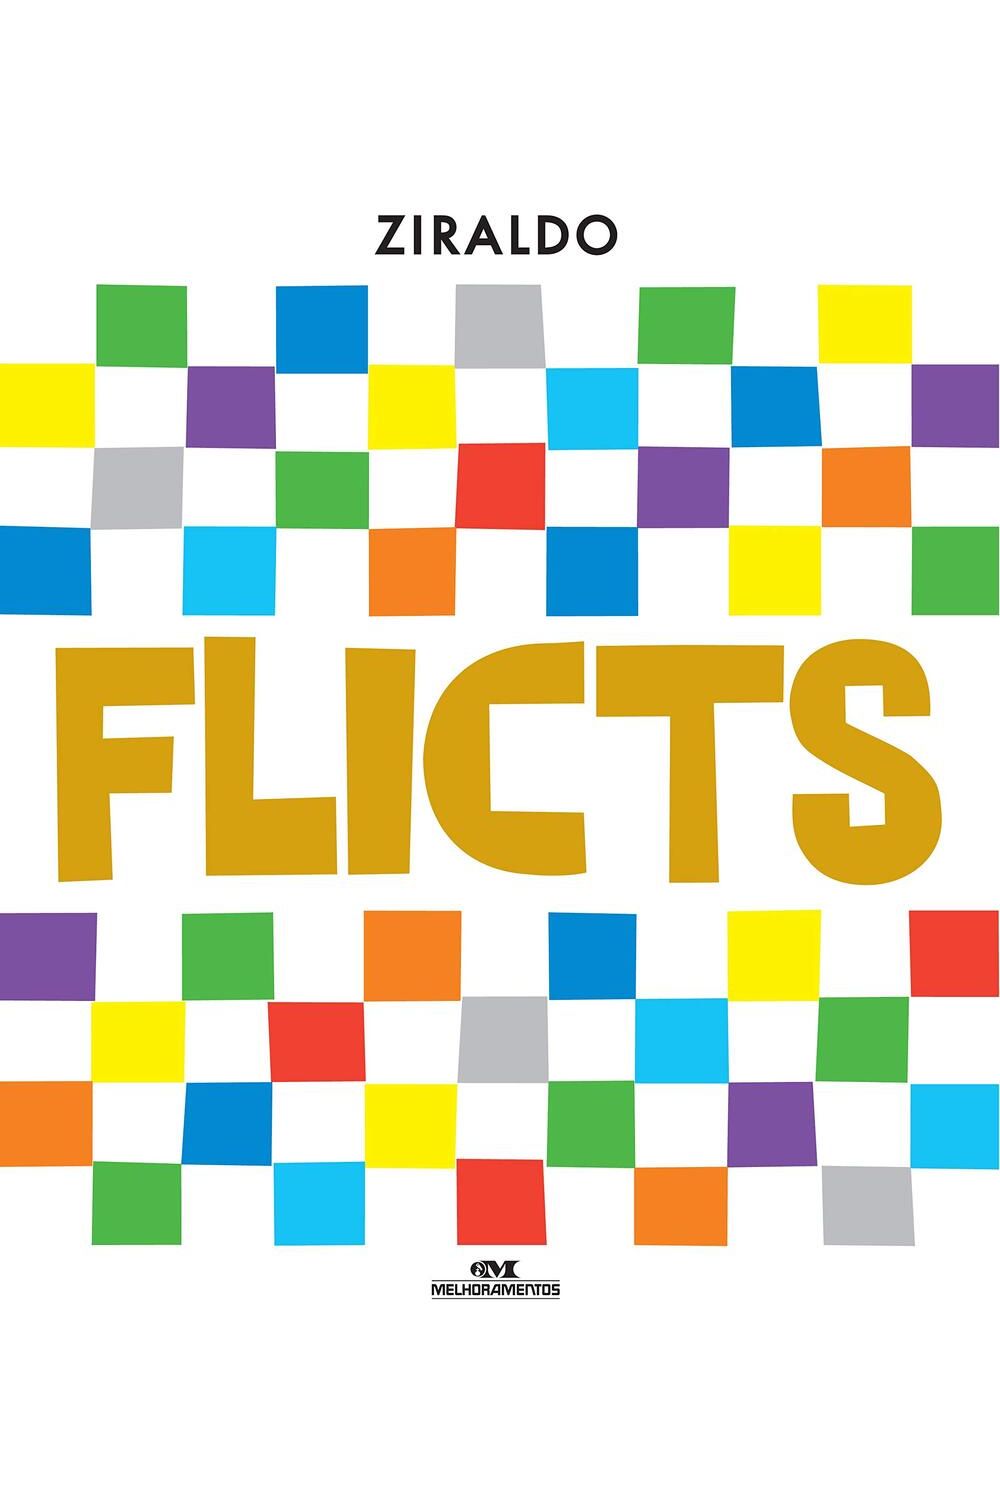 Flicts